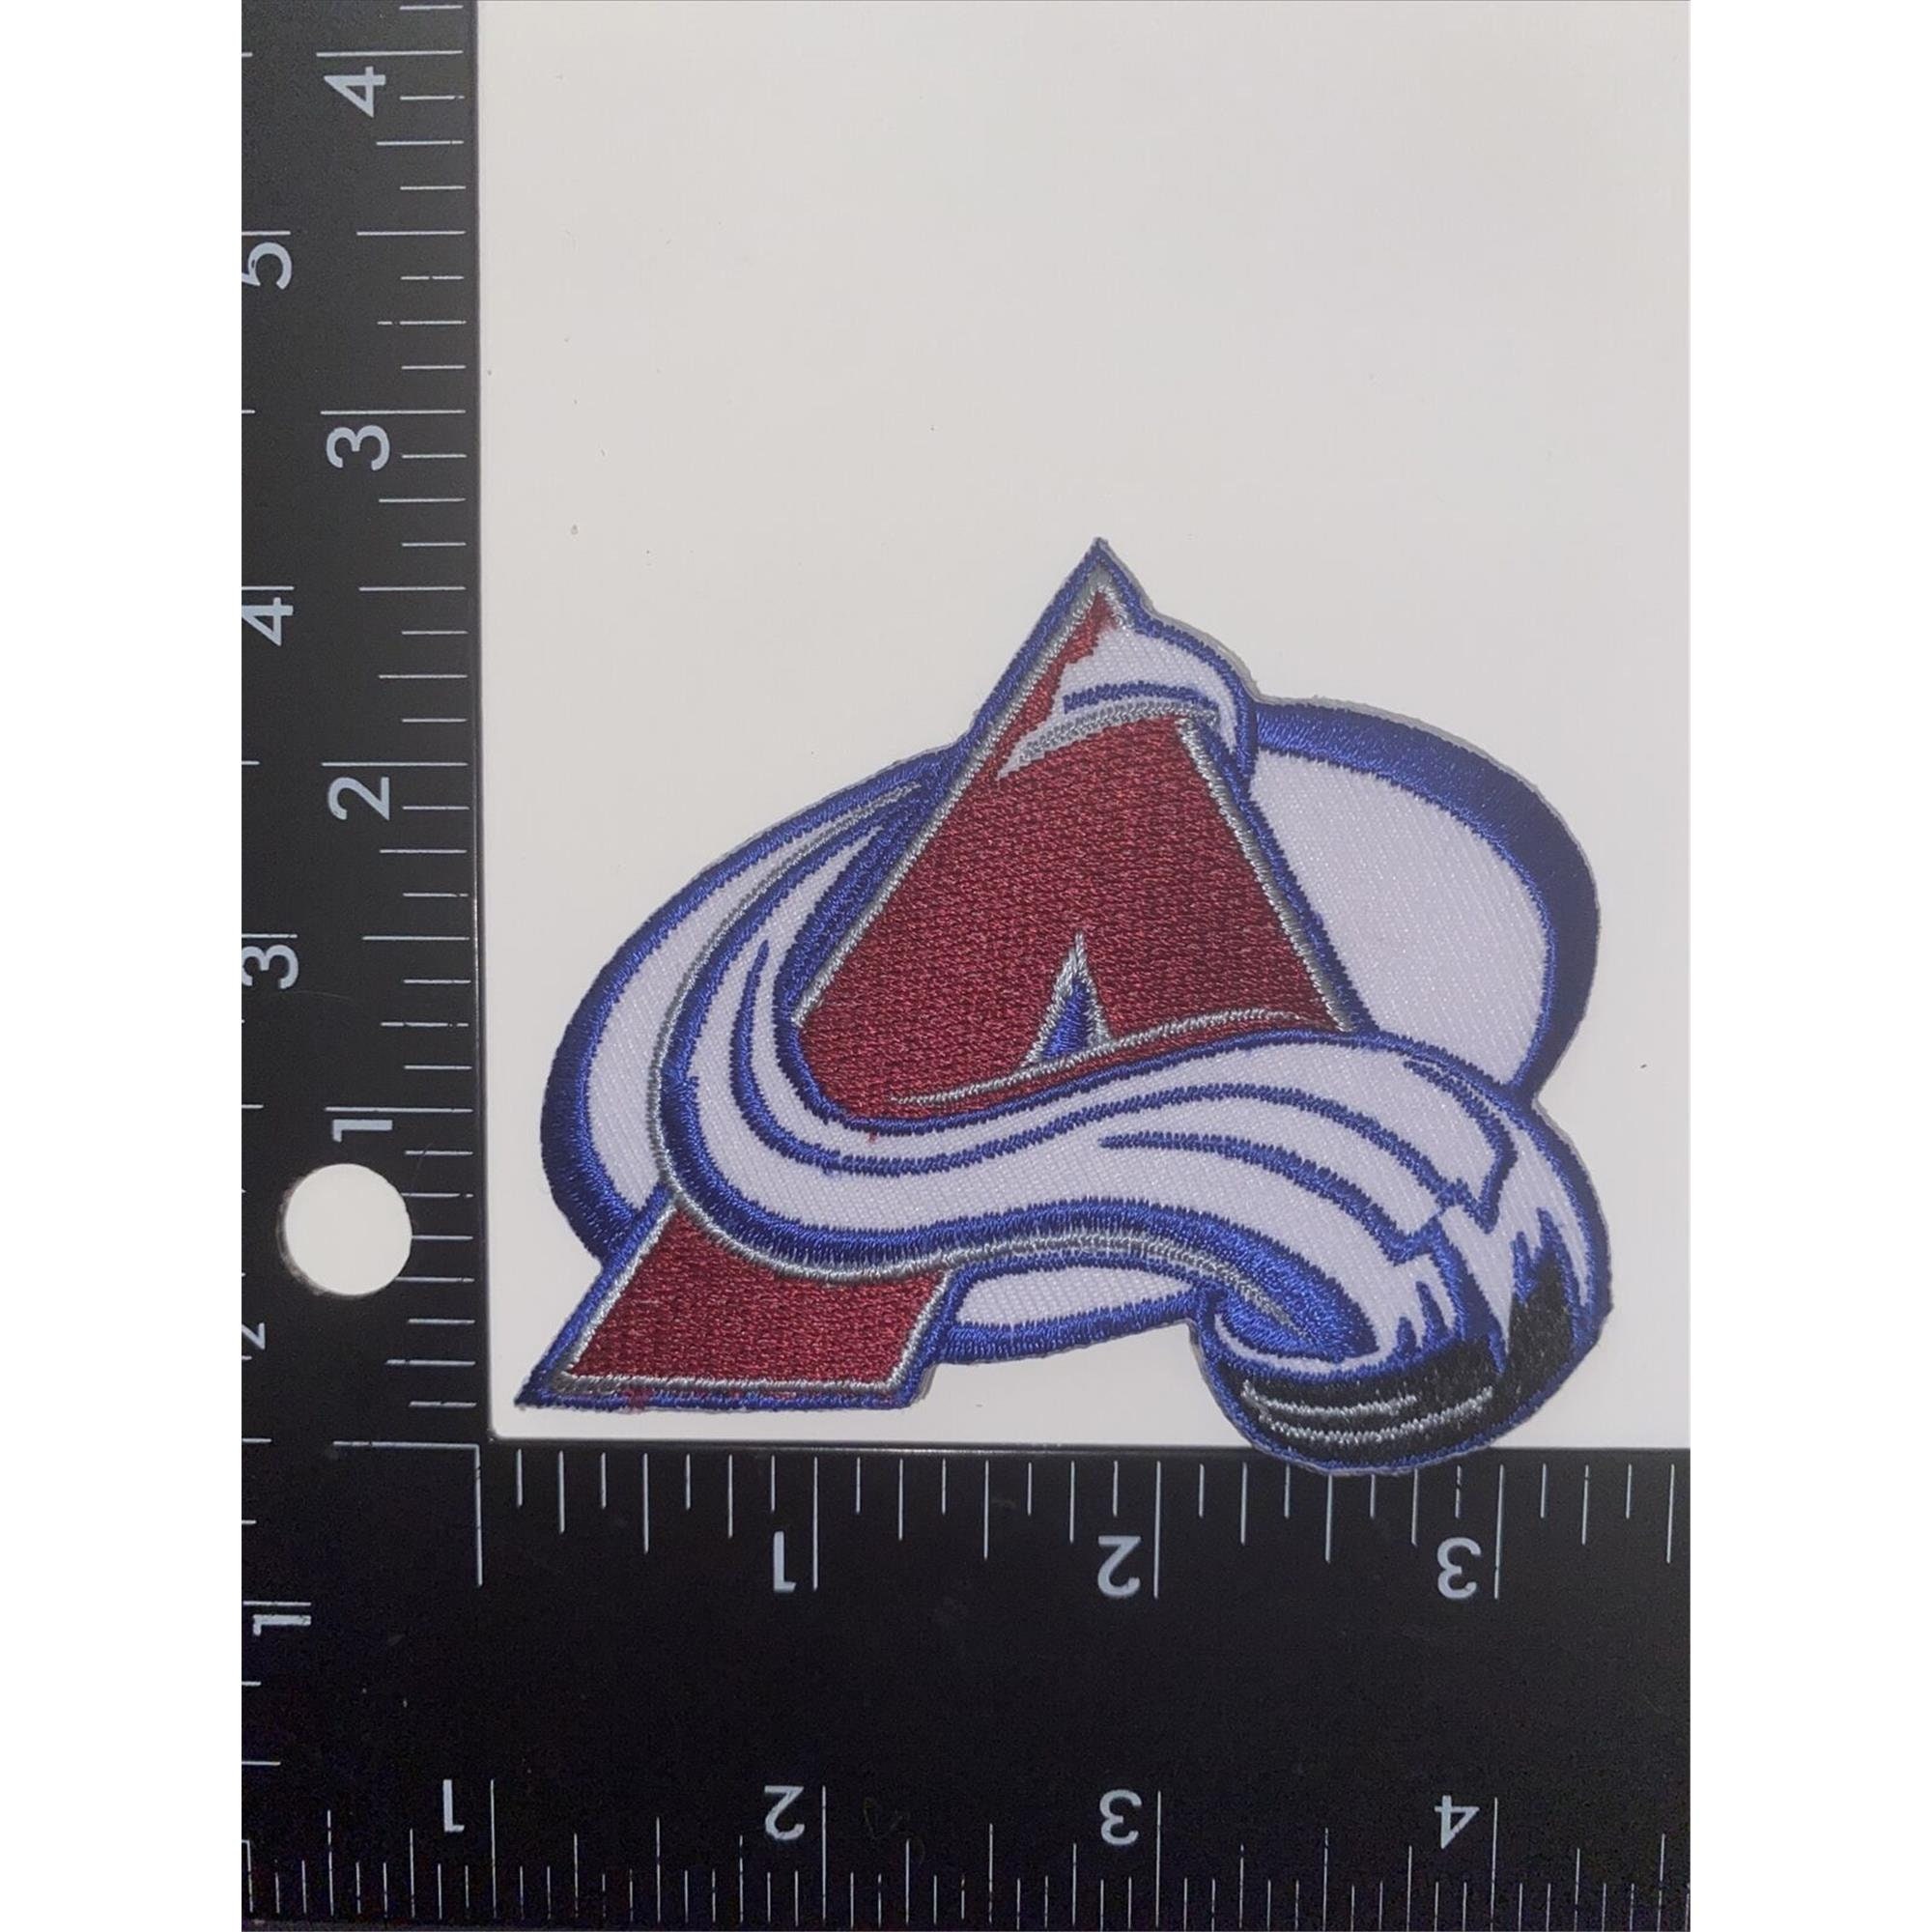  1996 NHL Stanley Cup Jersey Patch Colorado Avalanche vs.  Florida Panthers : Applique Patches : Sports & Outdoors